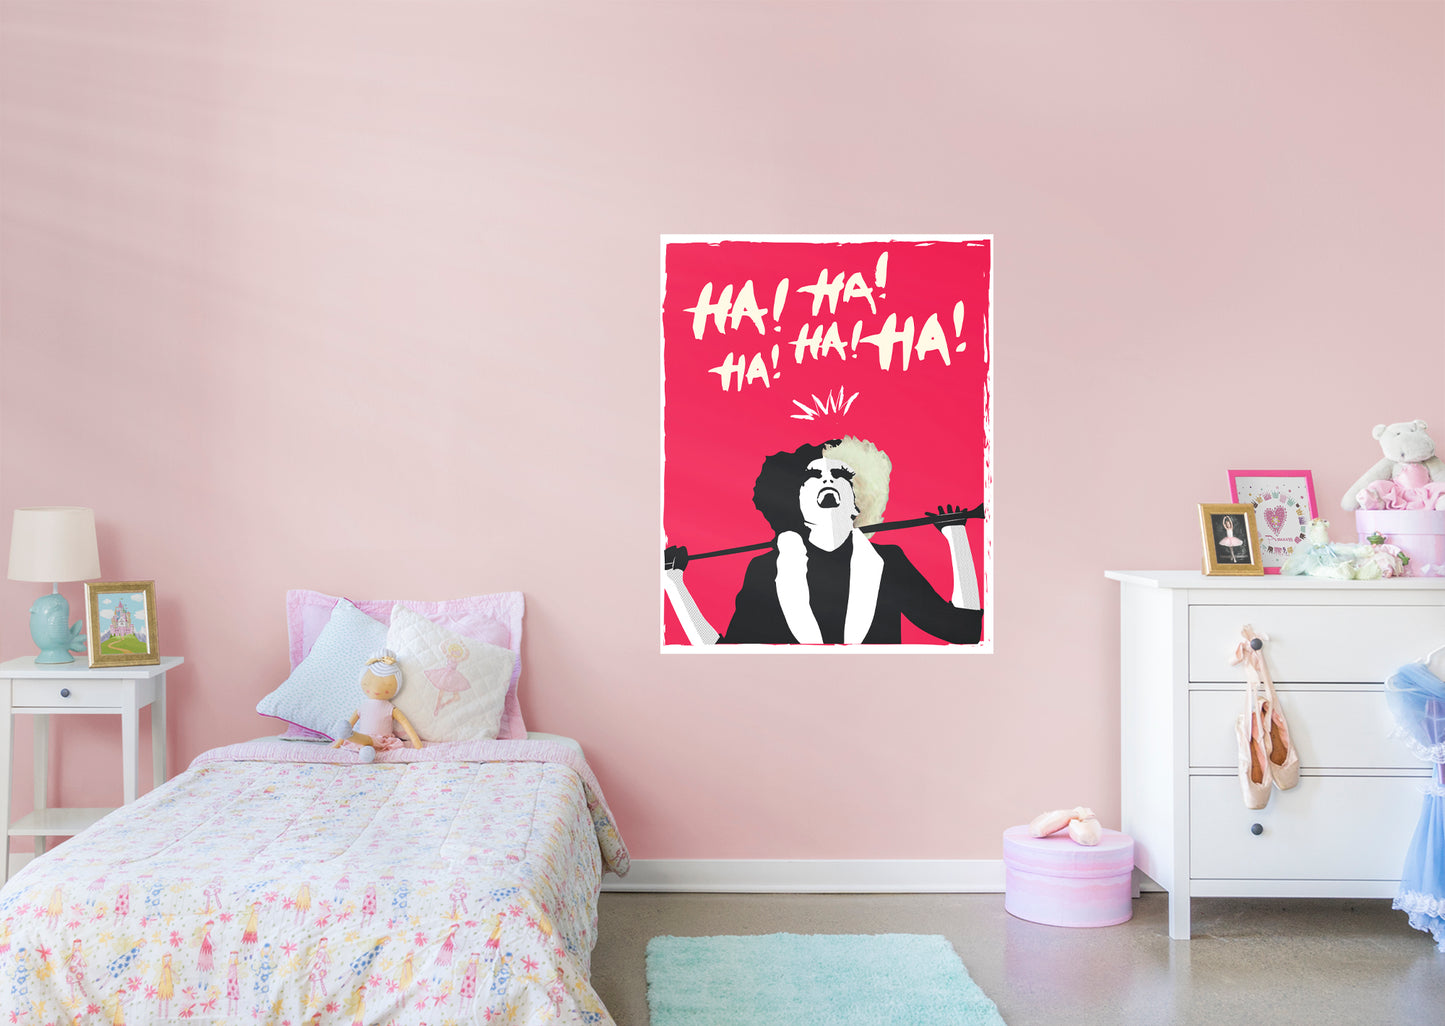 Cruella Movie:  Haha Mural        - Officially Licensed Disney Removable Wall   Adhesive Decal